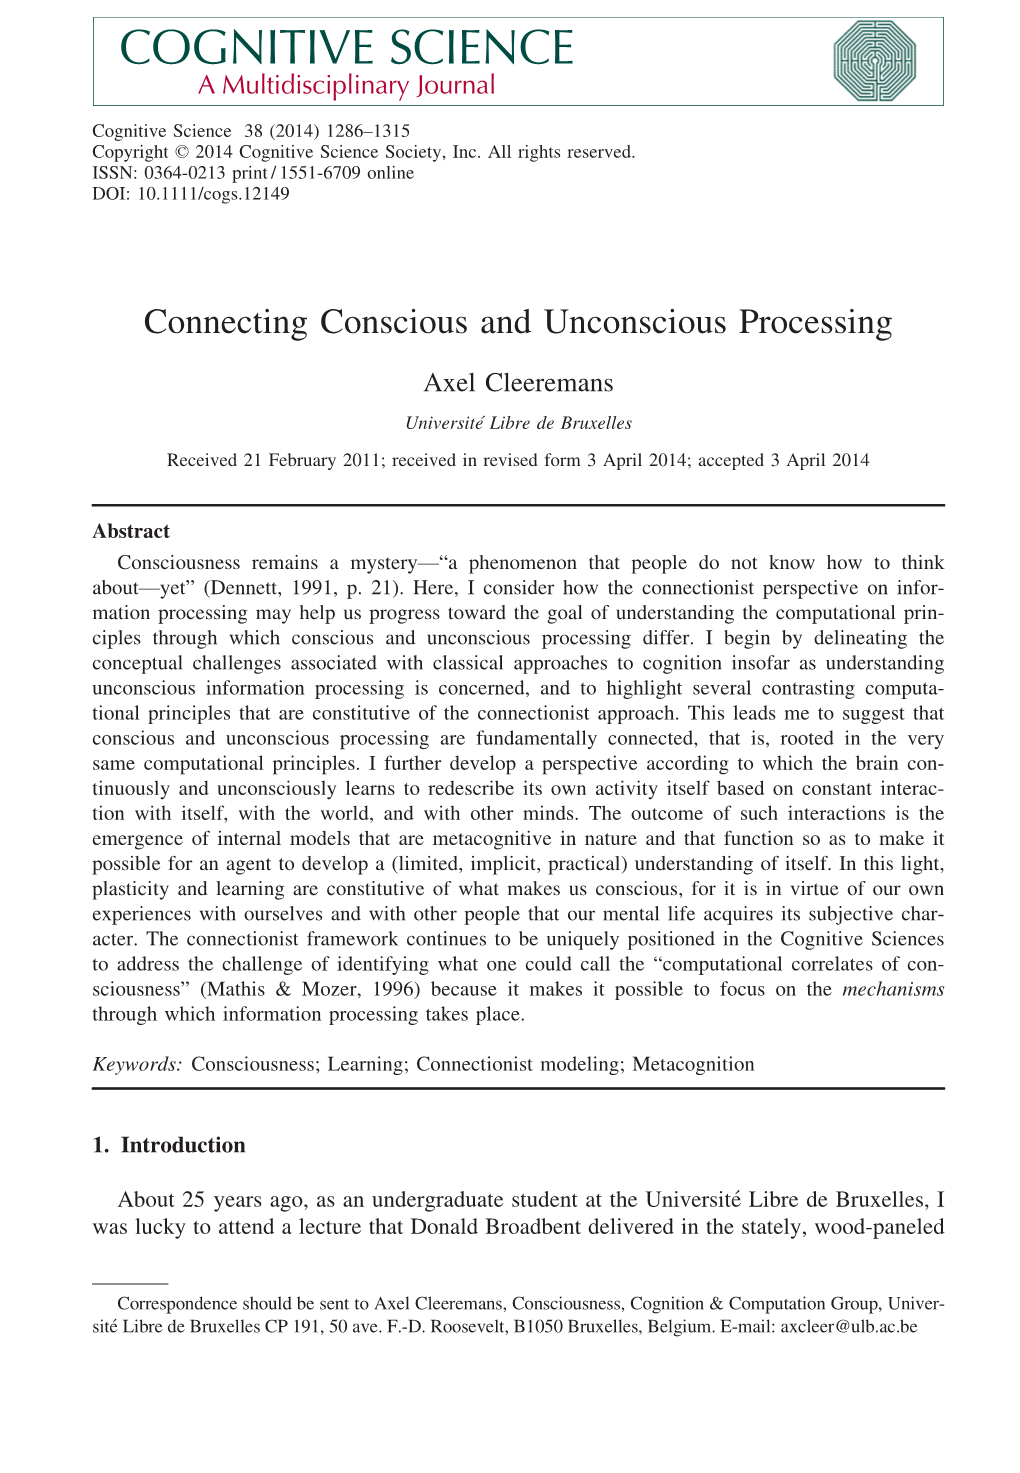 Connecting Conscious and Unconscious Processing